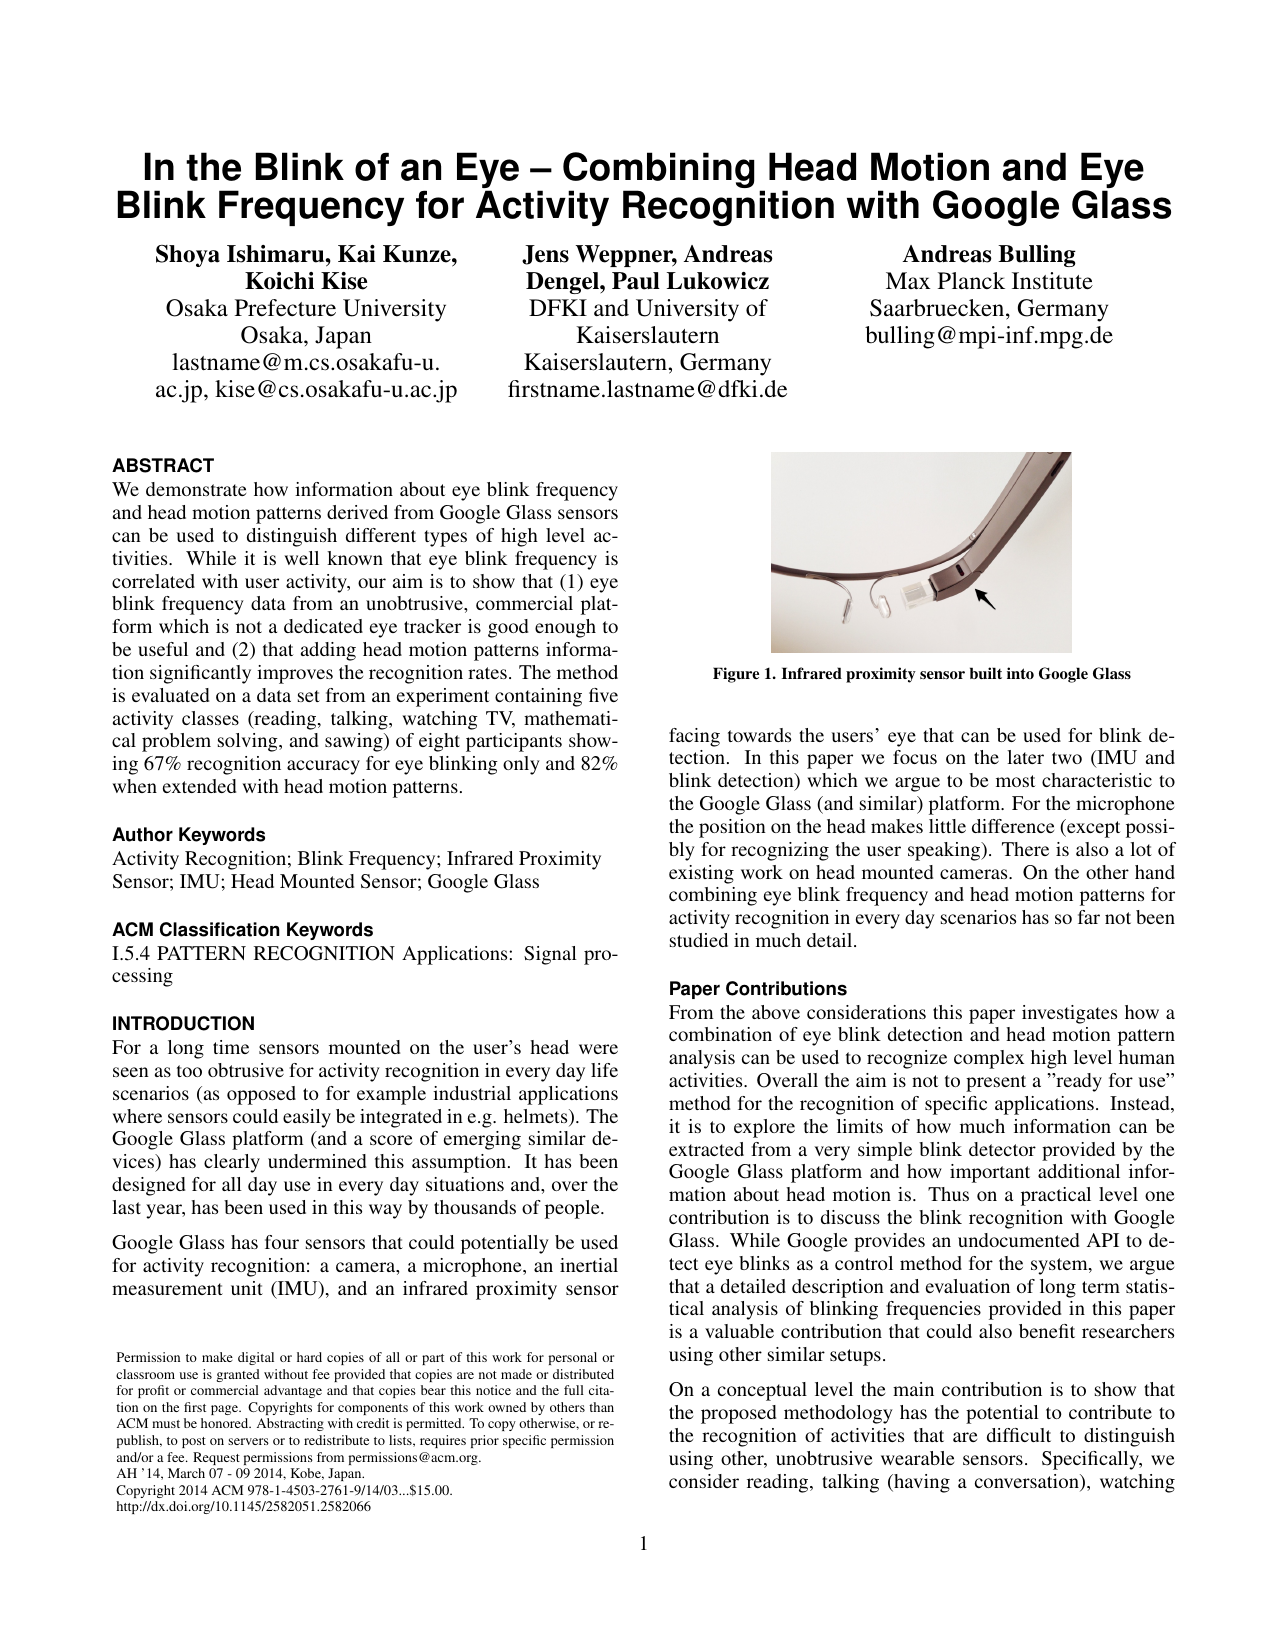 In the Blink of an Eye: Combining Head Motion and Eye Blink Frequency for Activity Recognition with Google Glass